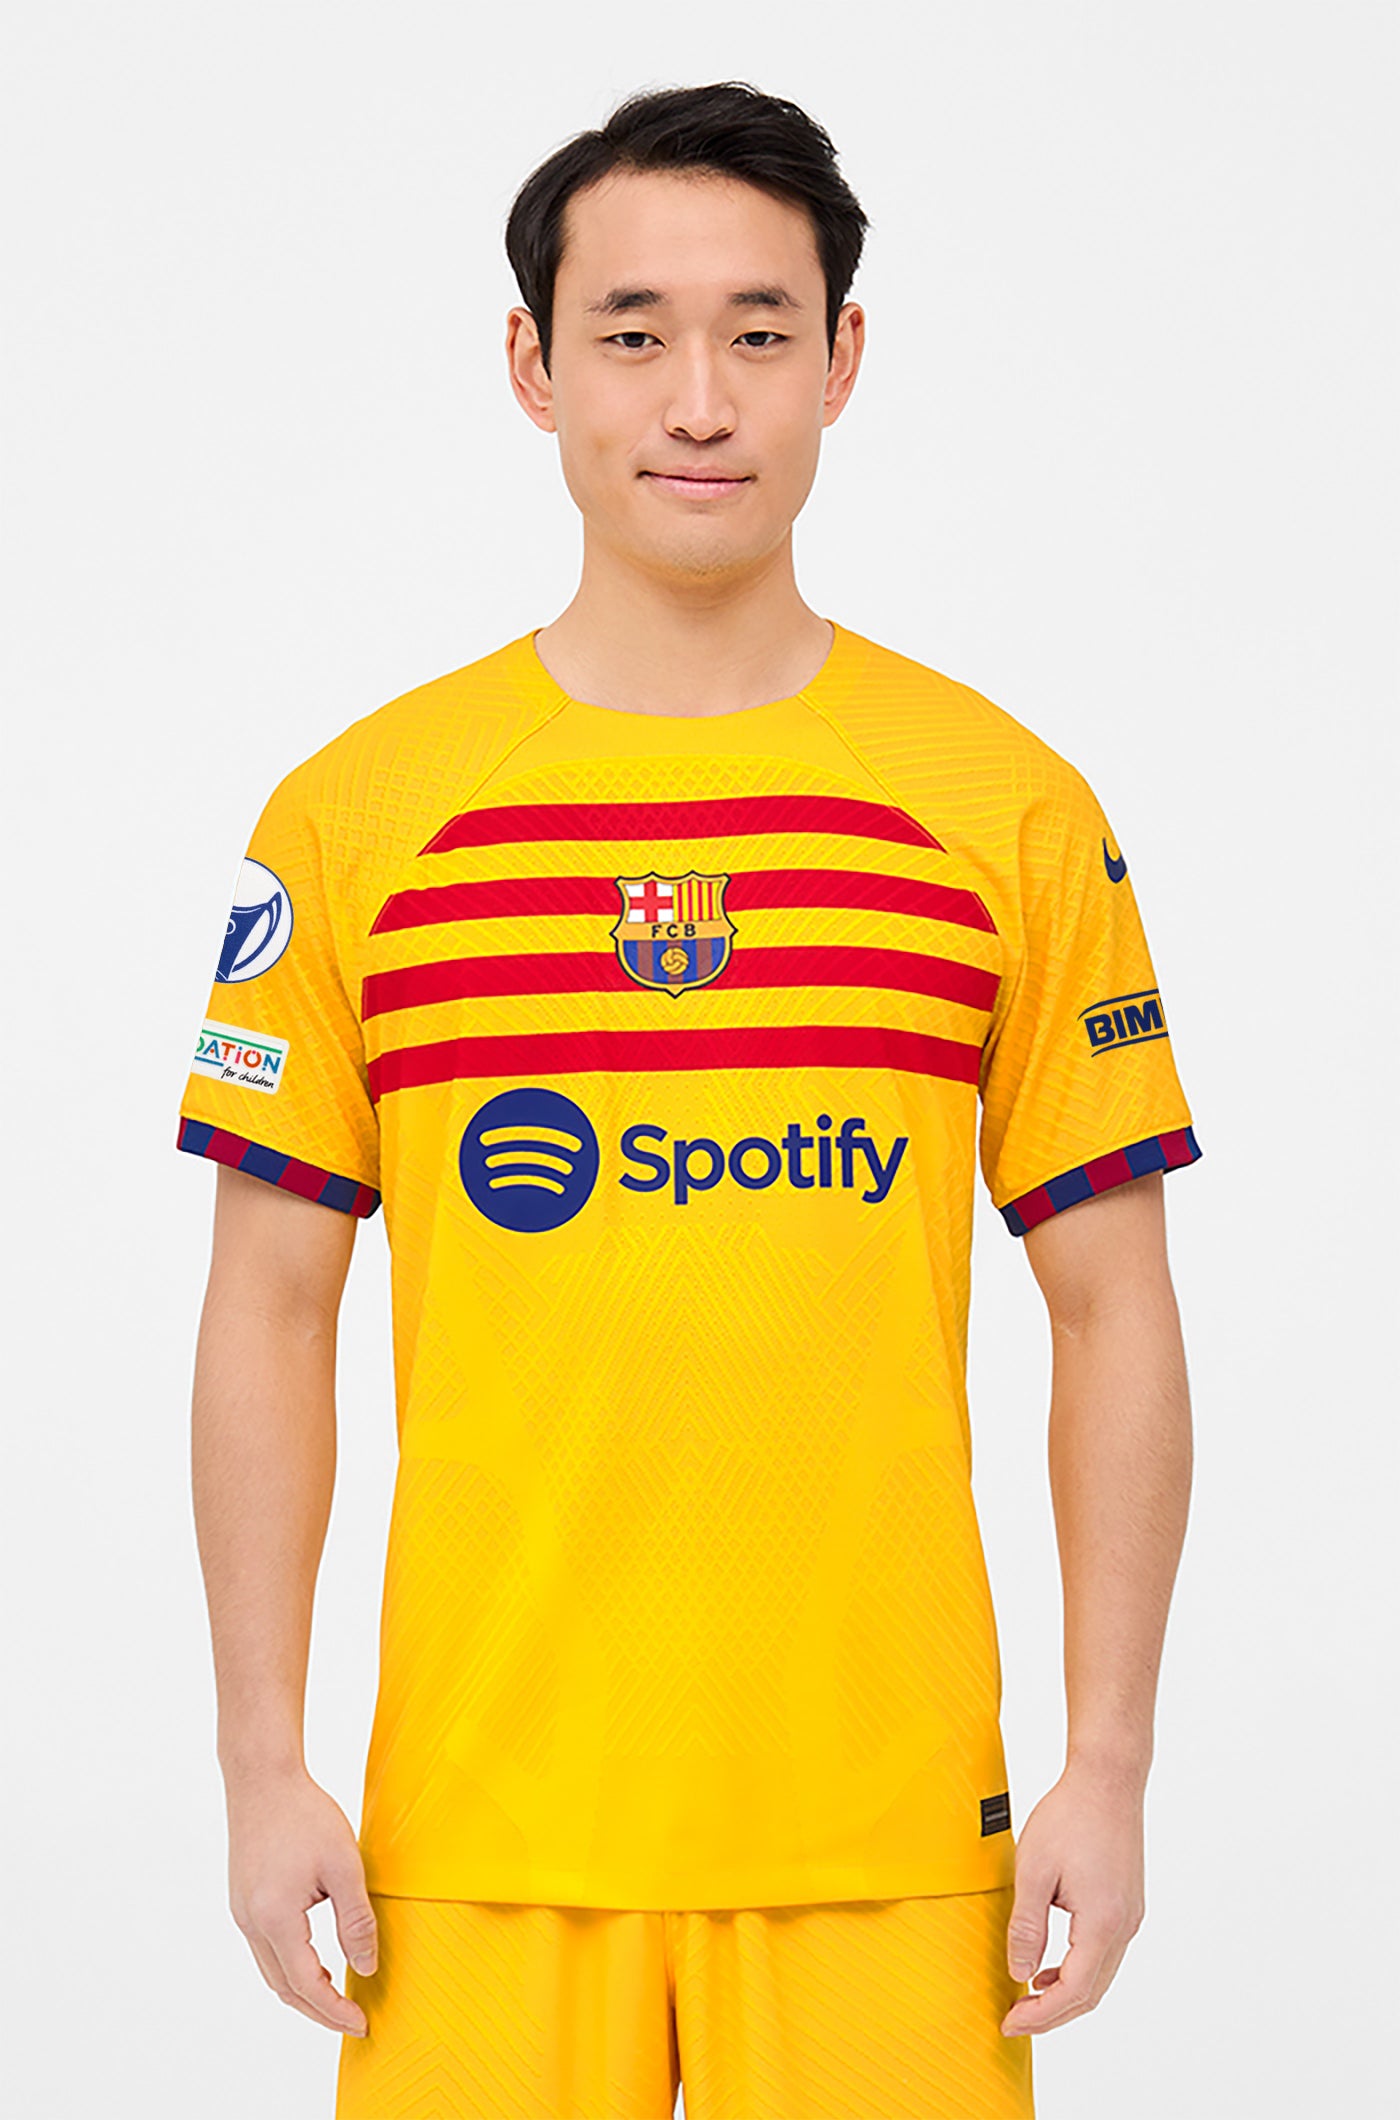 UWCL FC Barcelona fourth shirt 23/24 Player's Edition - WALSH